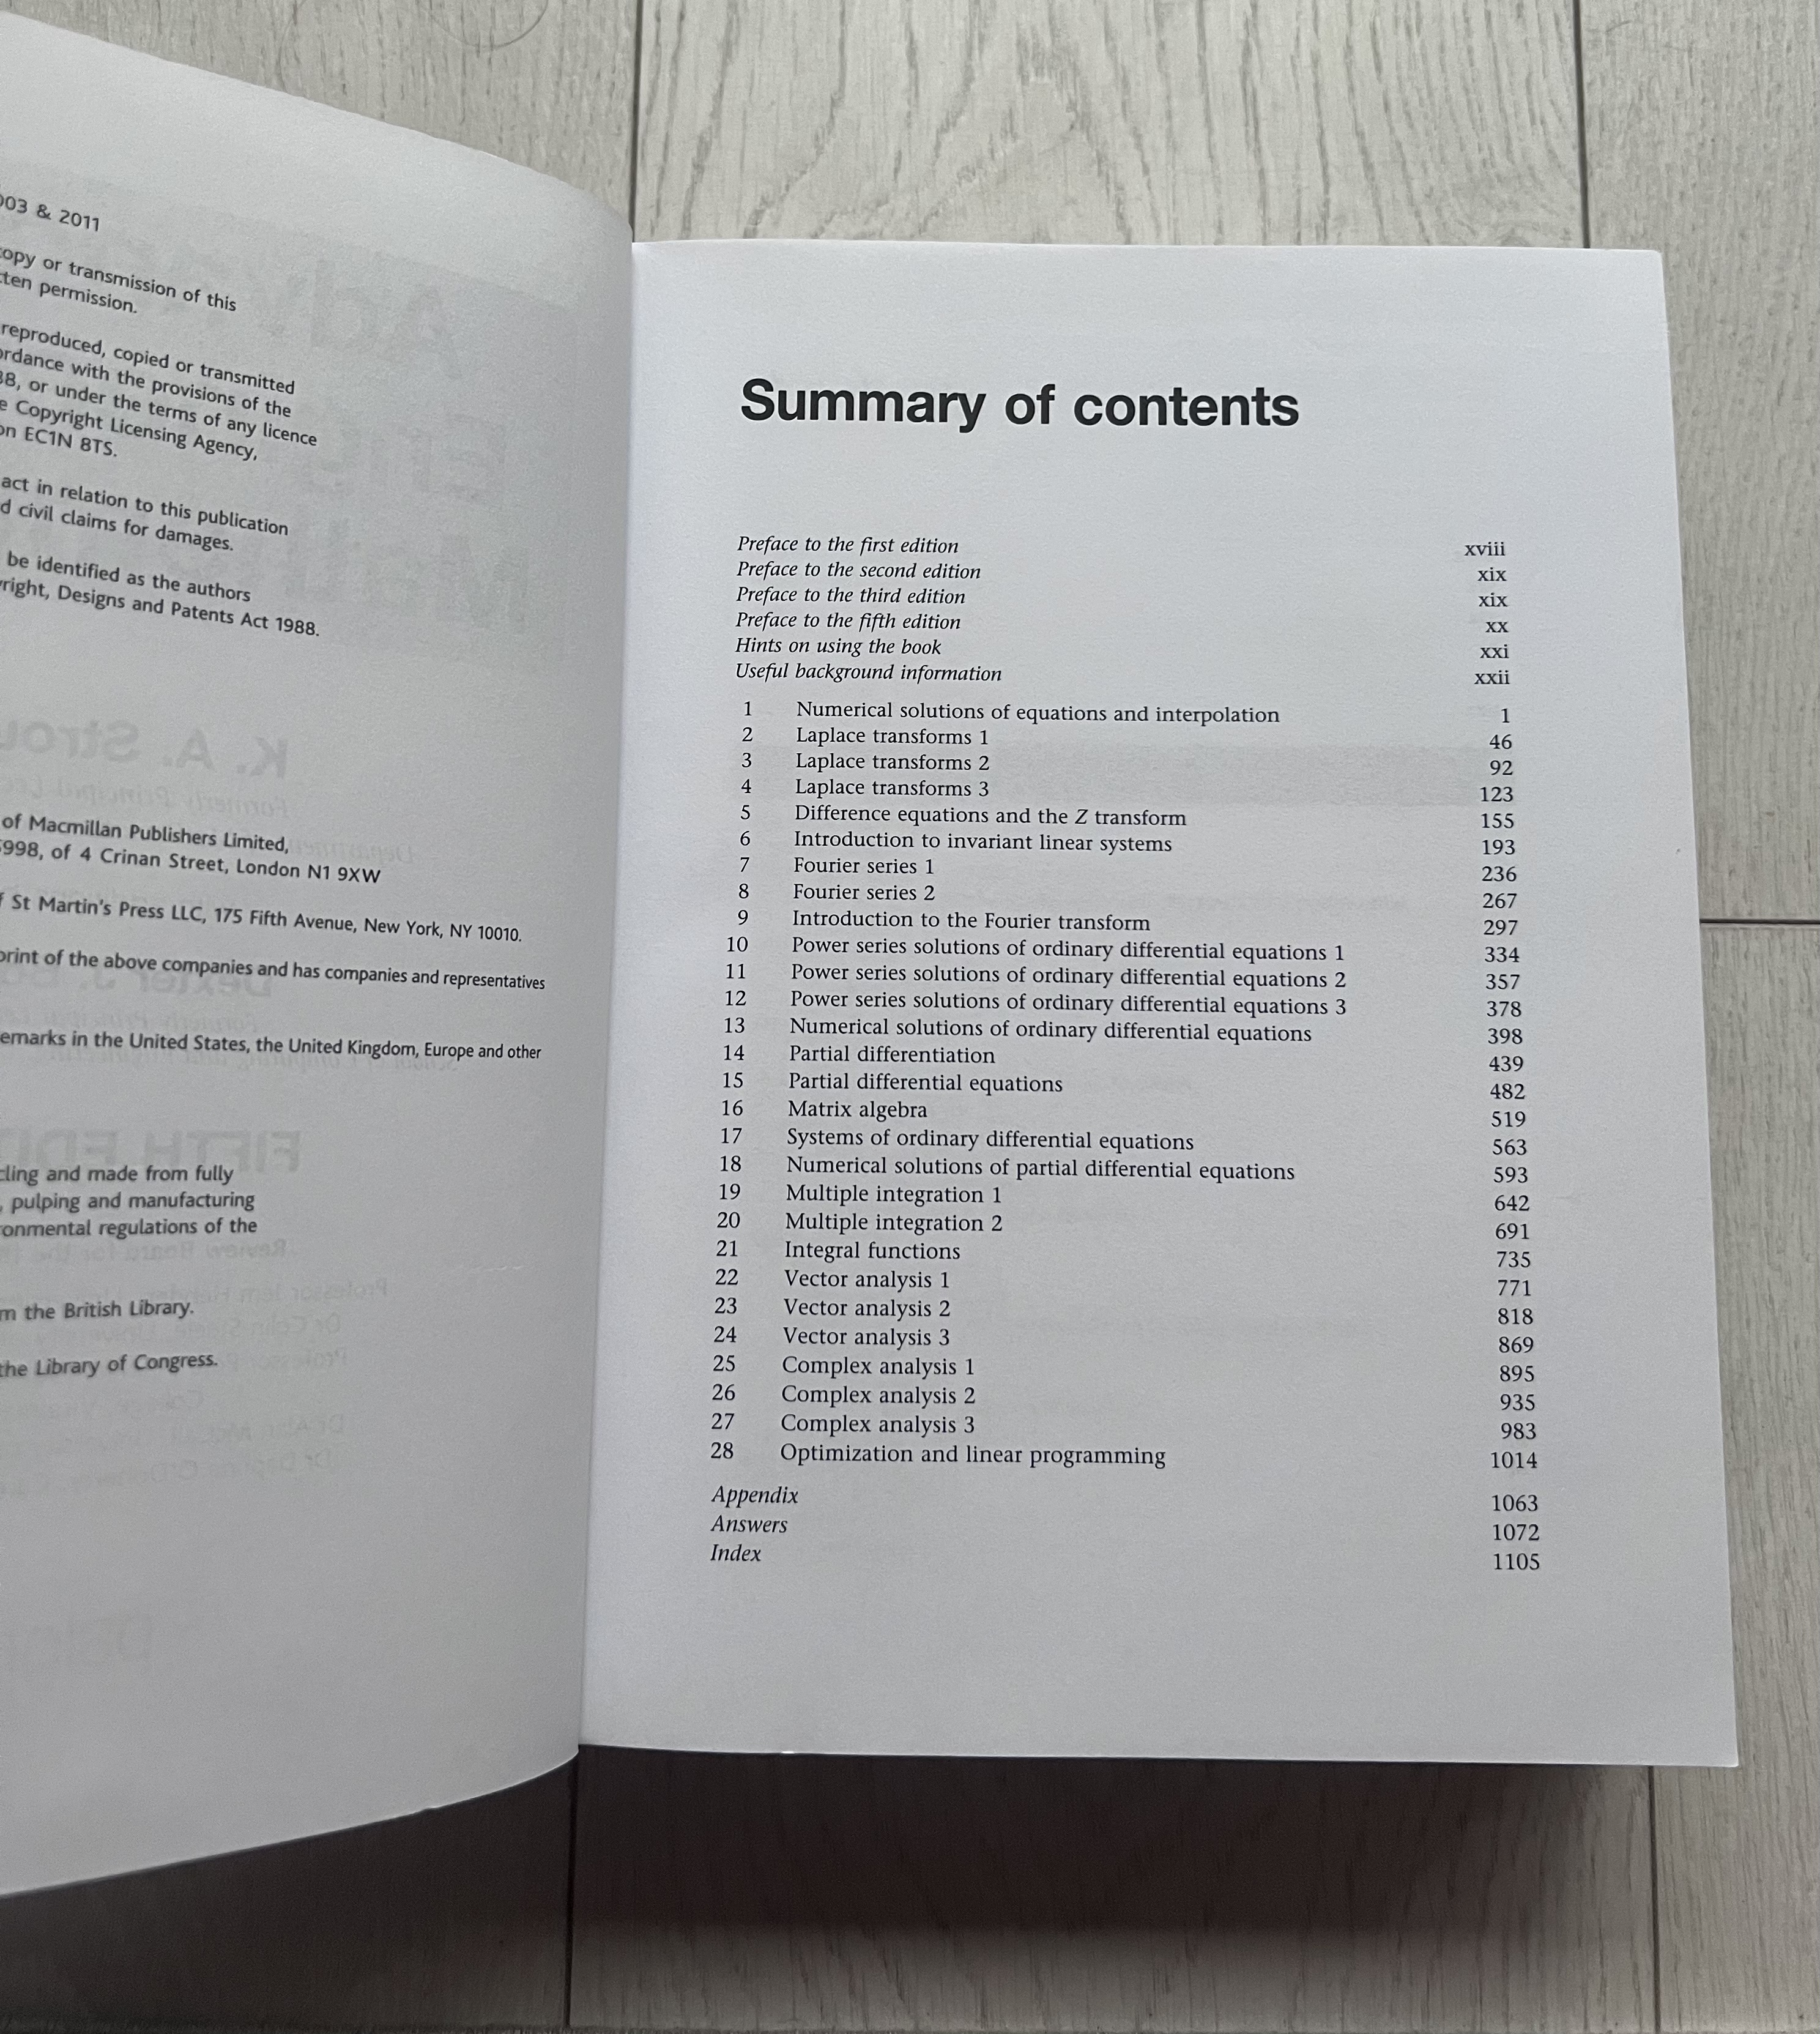 Summary of table of contents 